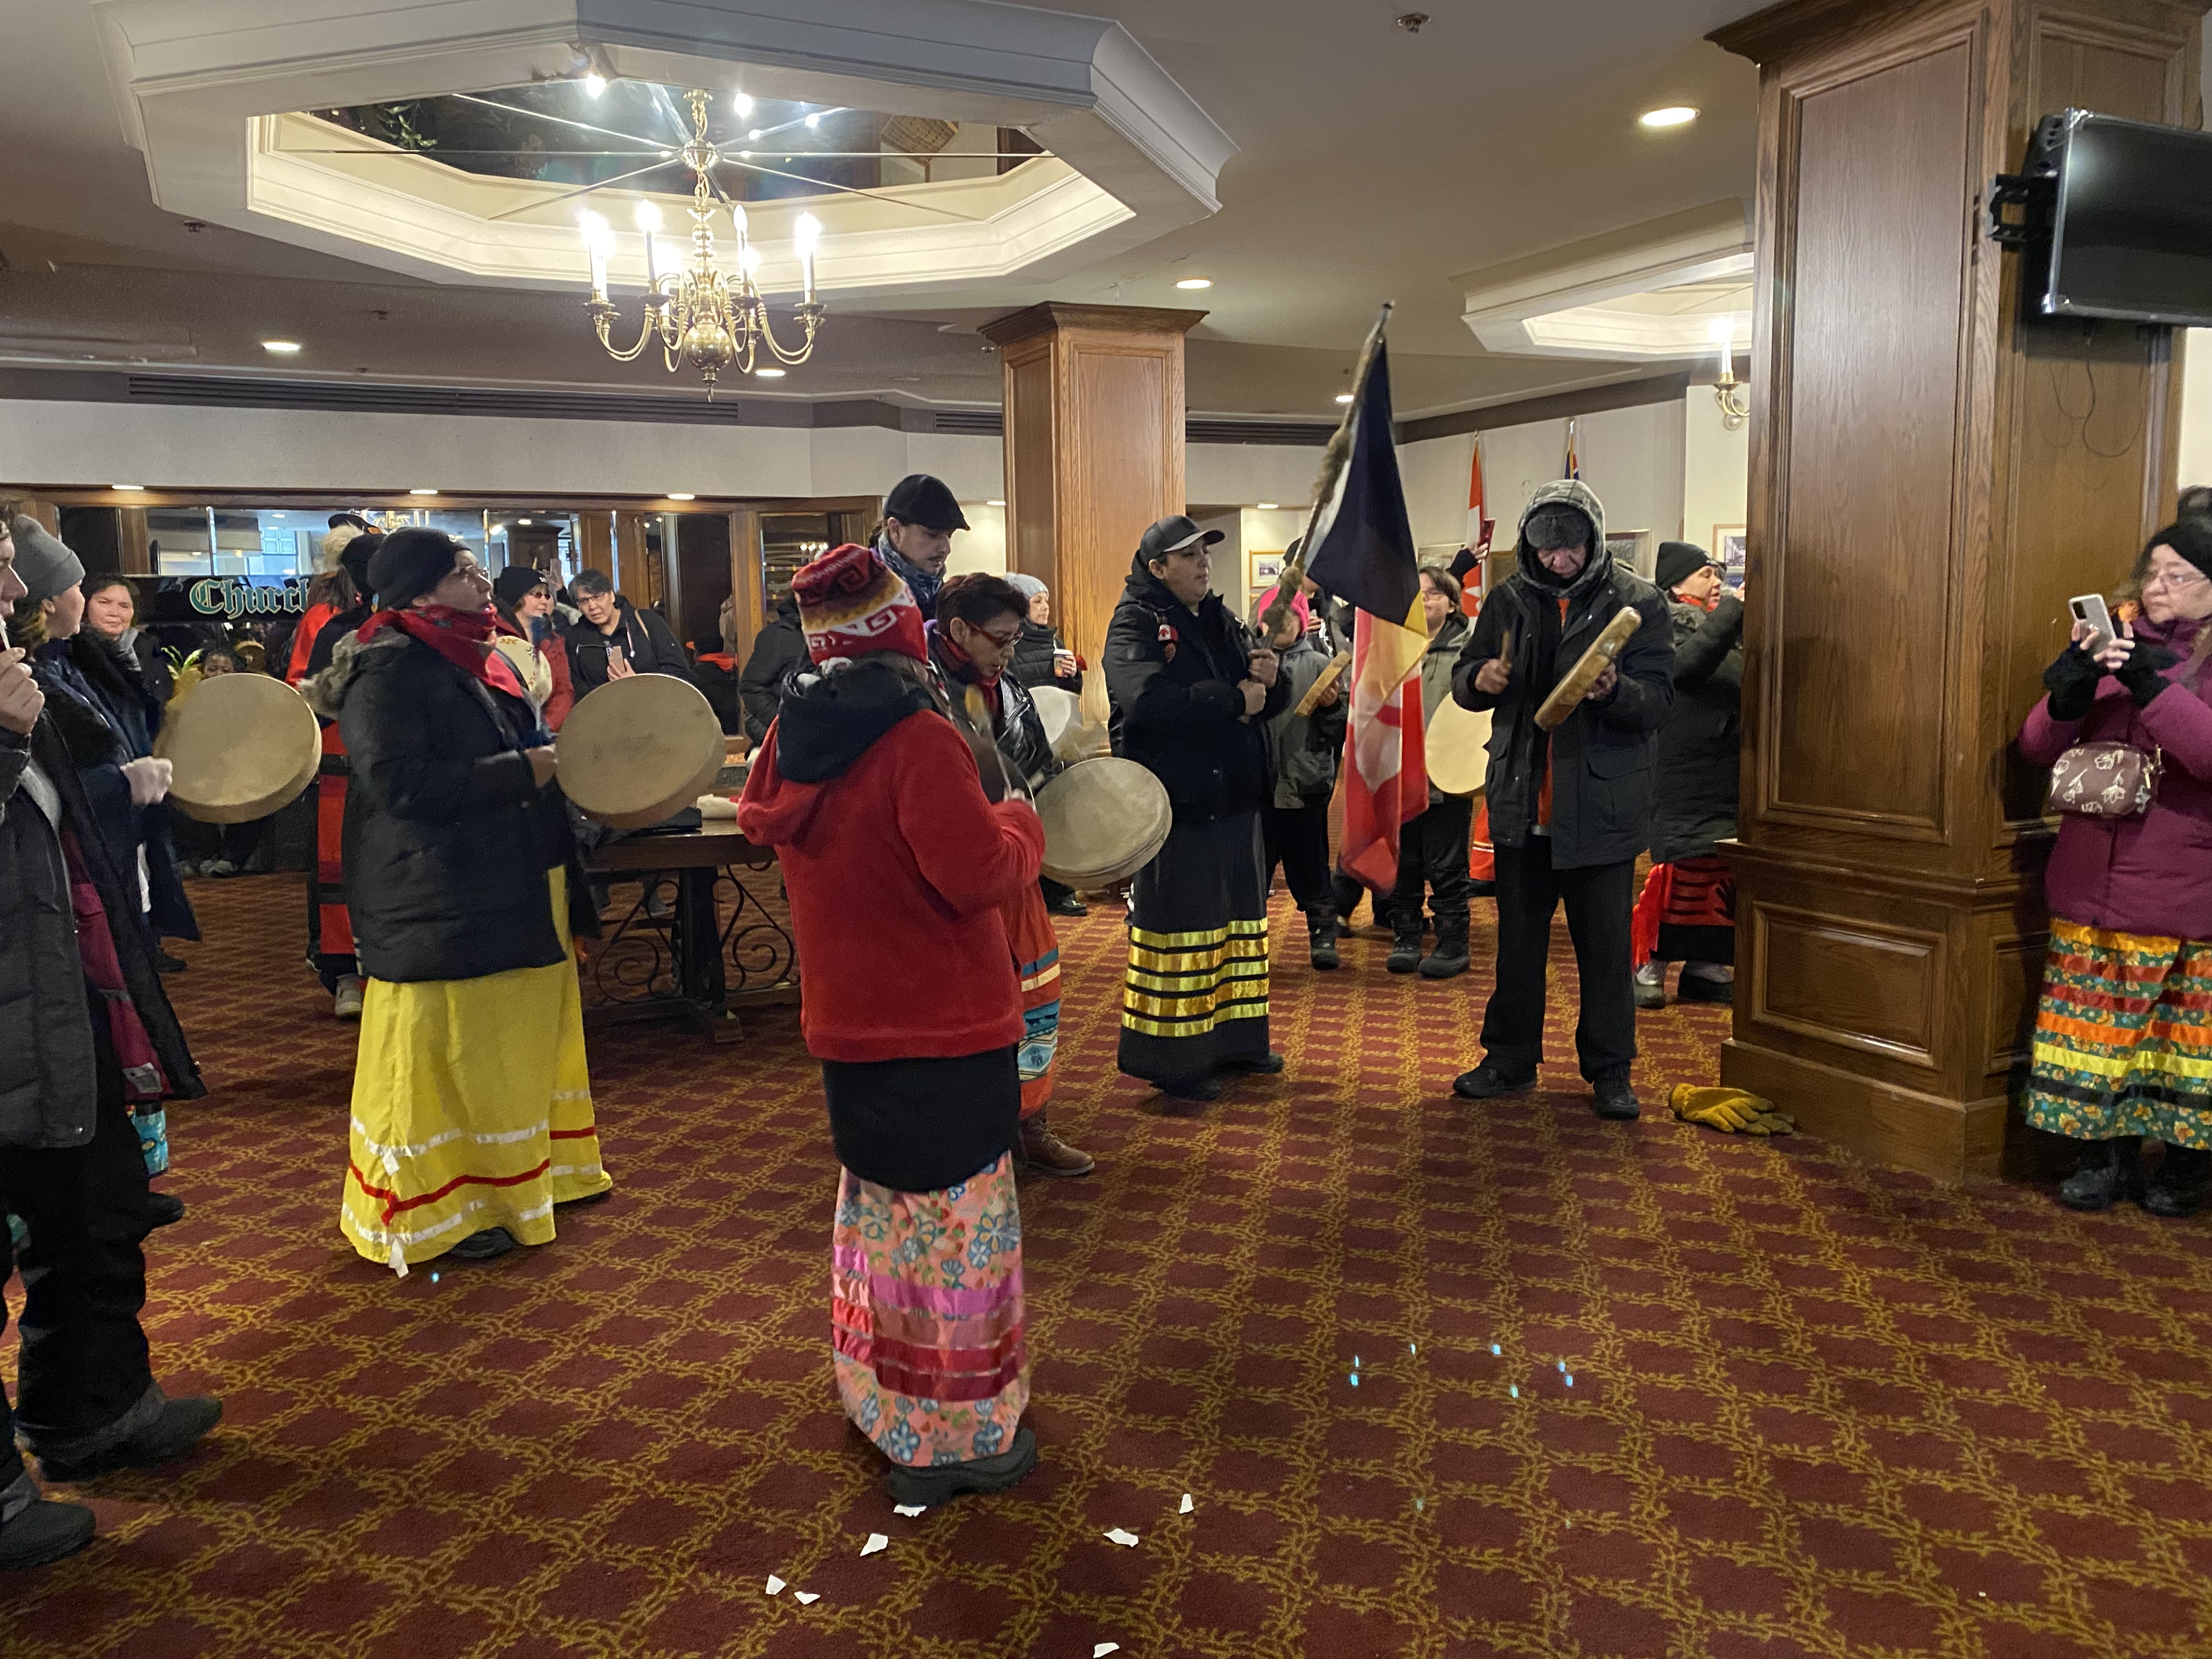 Indigenous outcry over hotel restraint incident sparks calls for change in Winnipeg